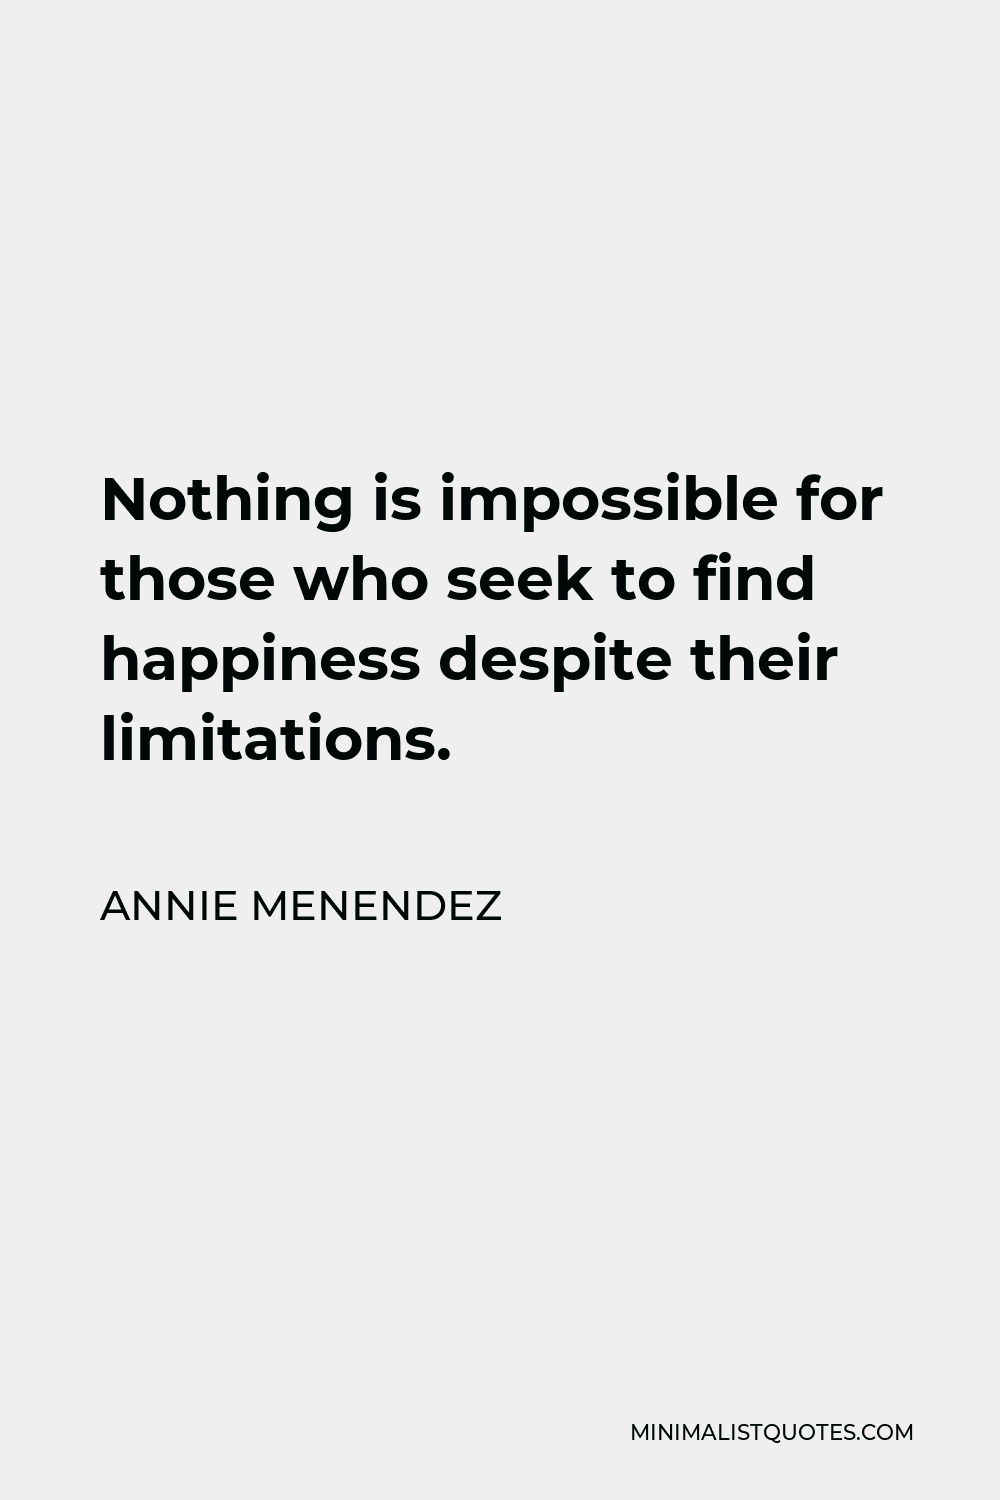 Annie Menendez Quote - Nothing is impossible for those who seek to find happiness despite their limitations.